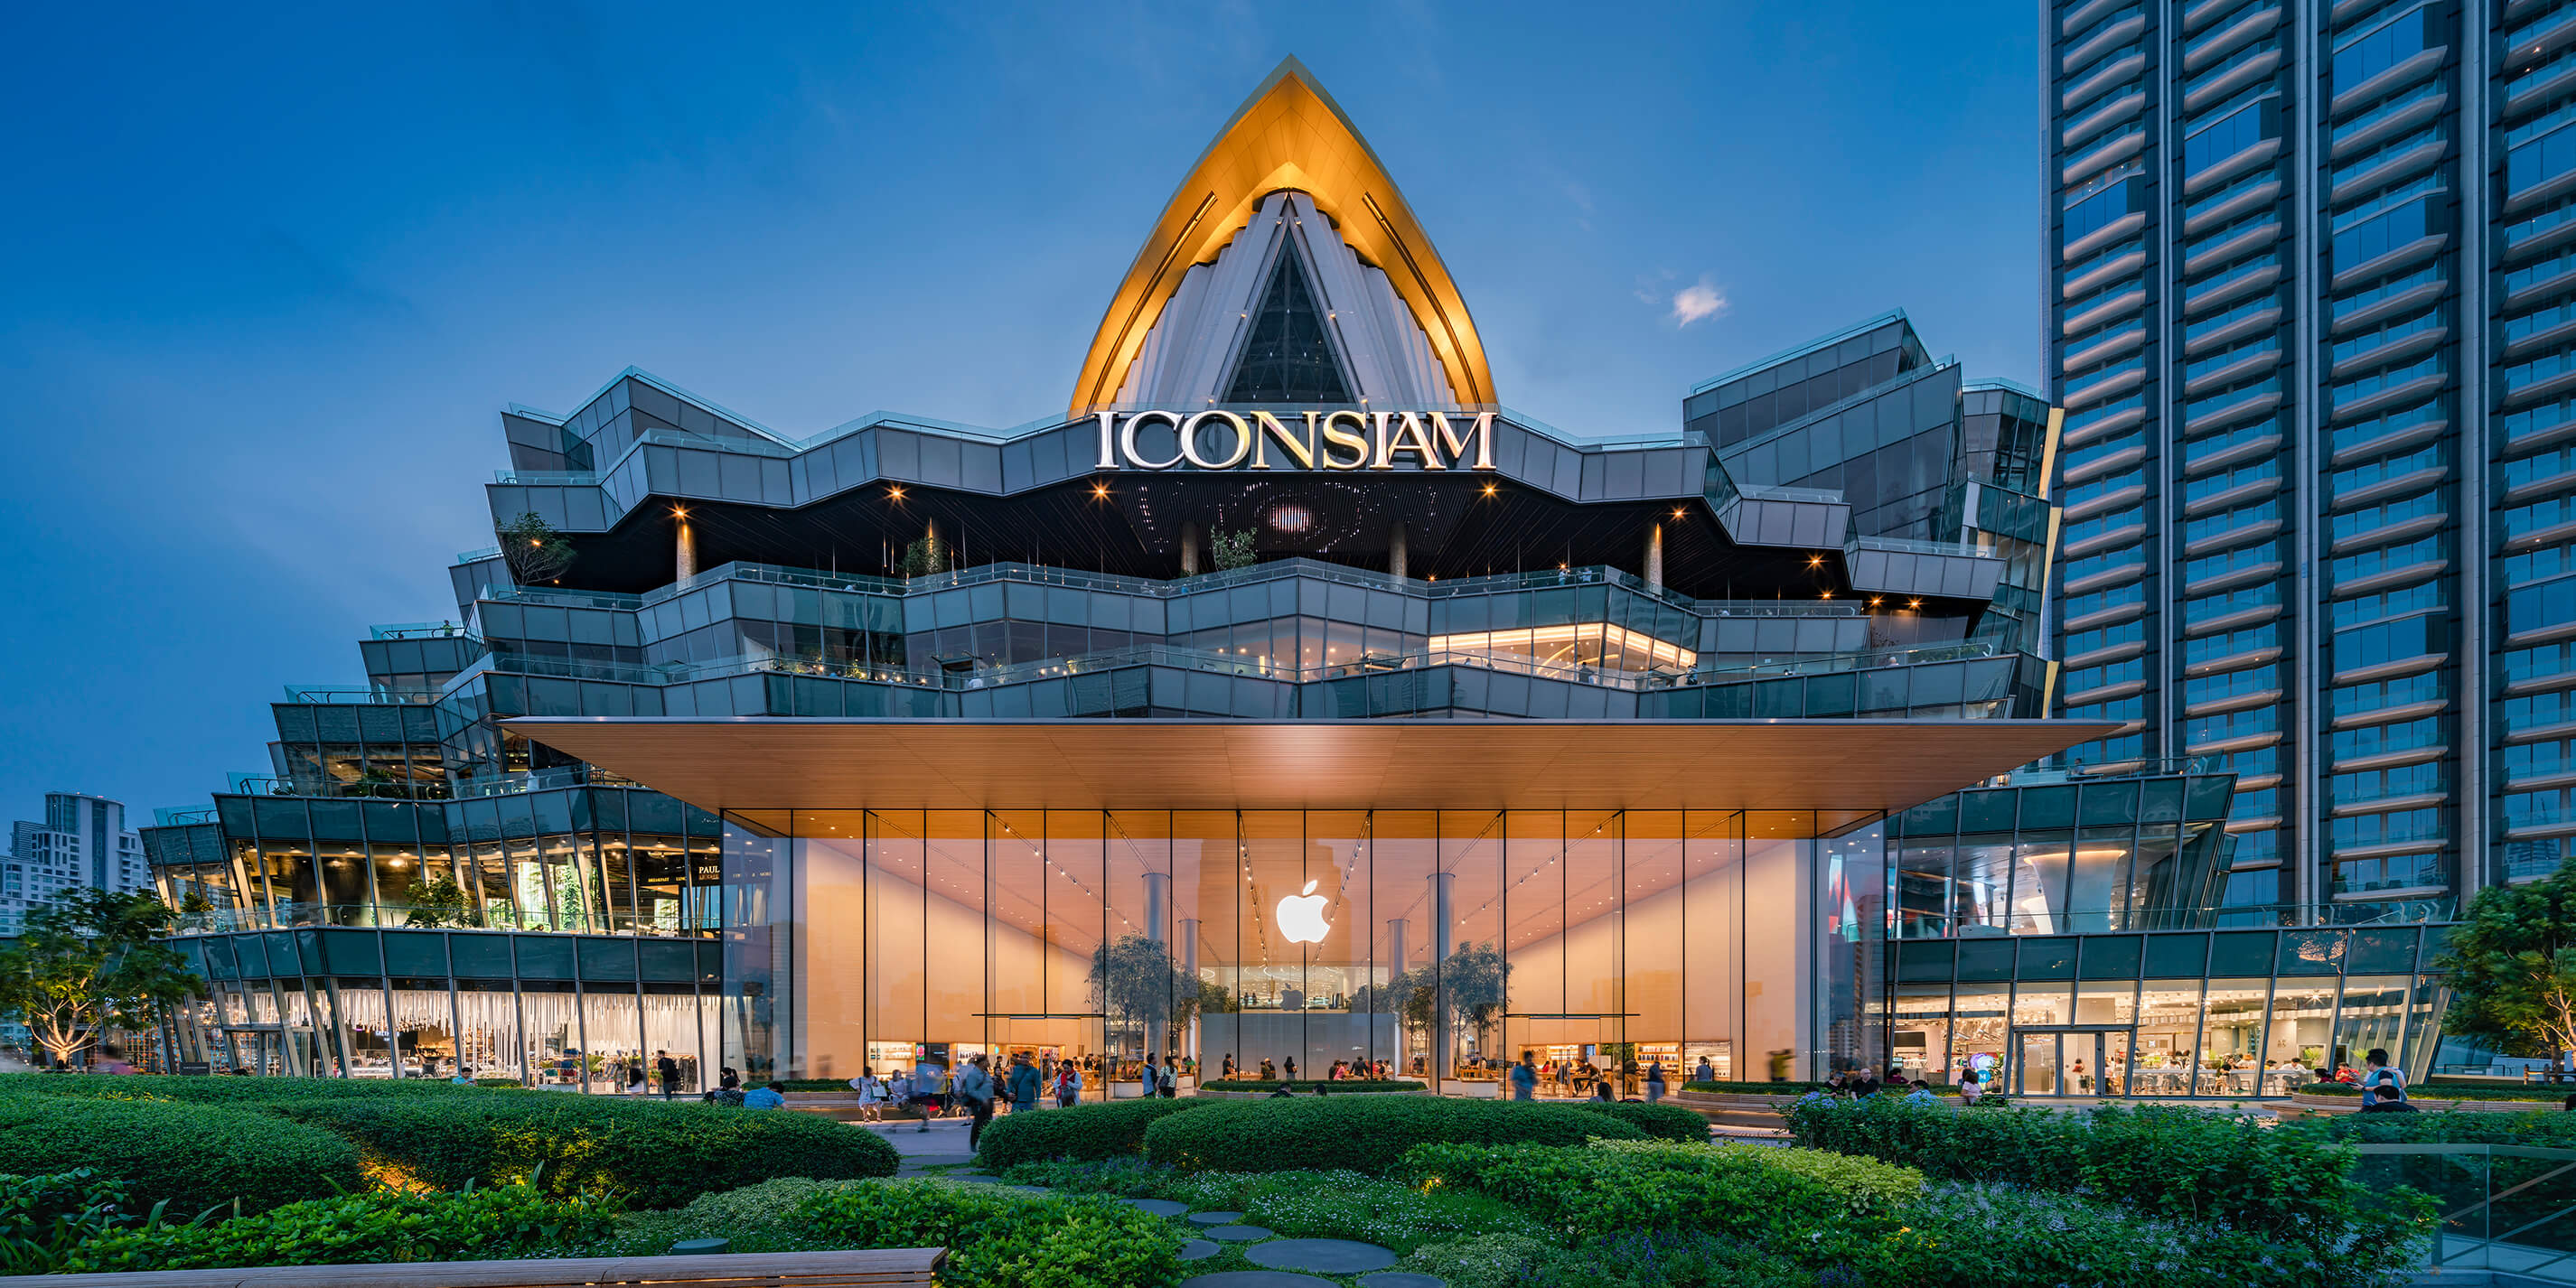 Alphard car rental in Bangkok traveling in the city, stop at ICONSIAM.